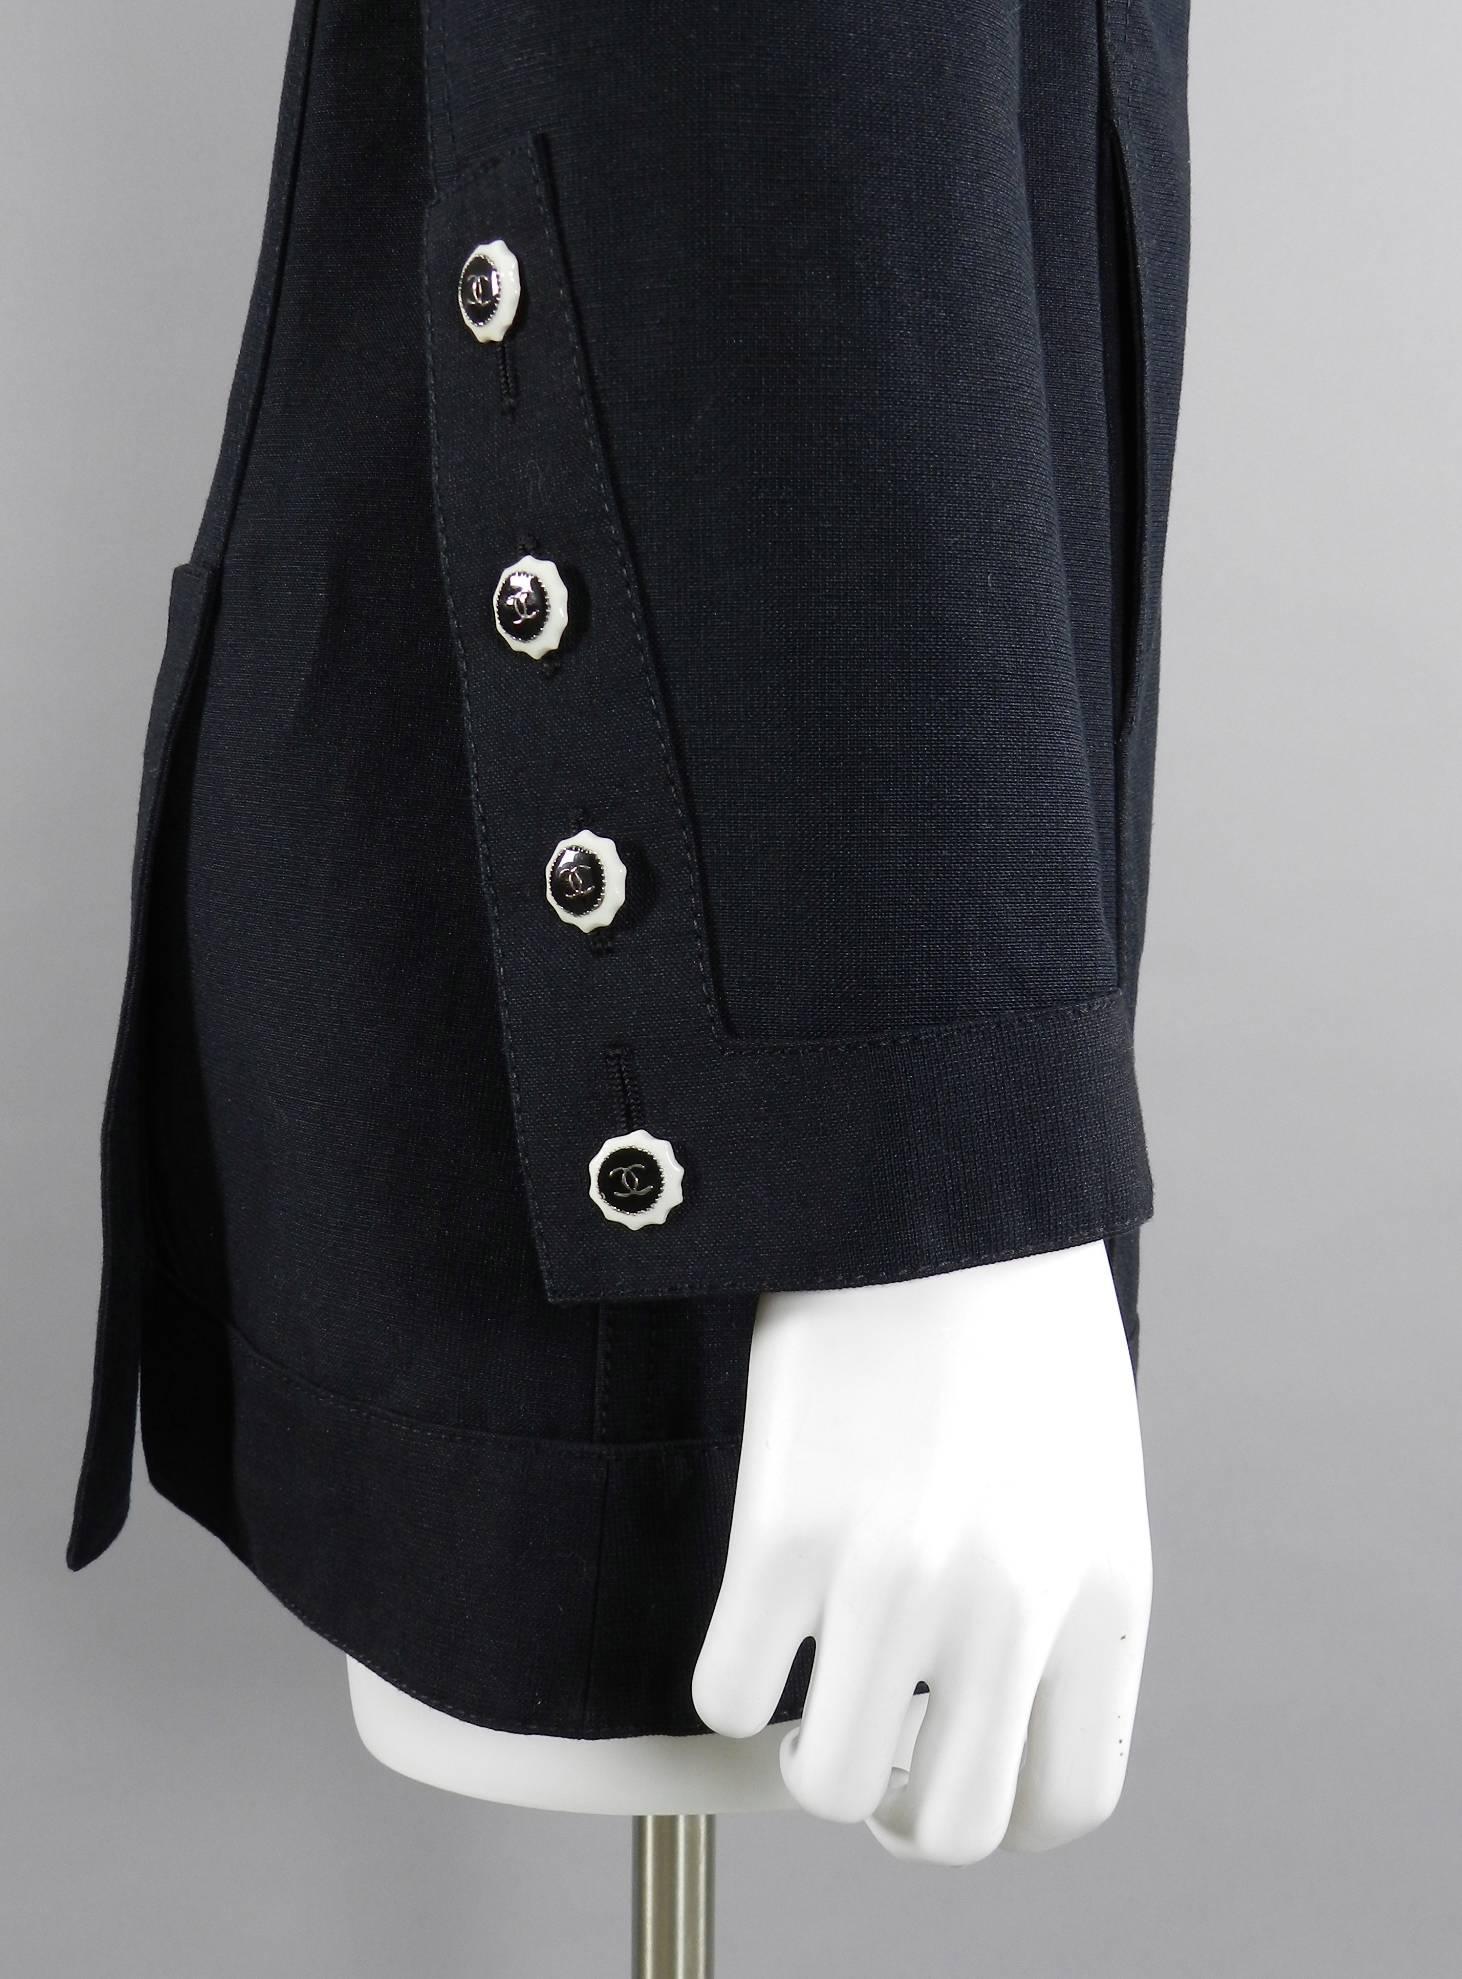 CHANEL 14C Runway Black Cotton Linen Jacket with White Buttons 1